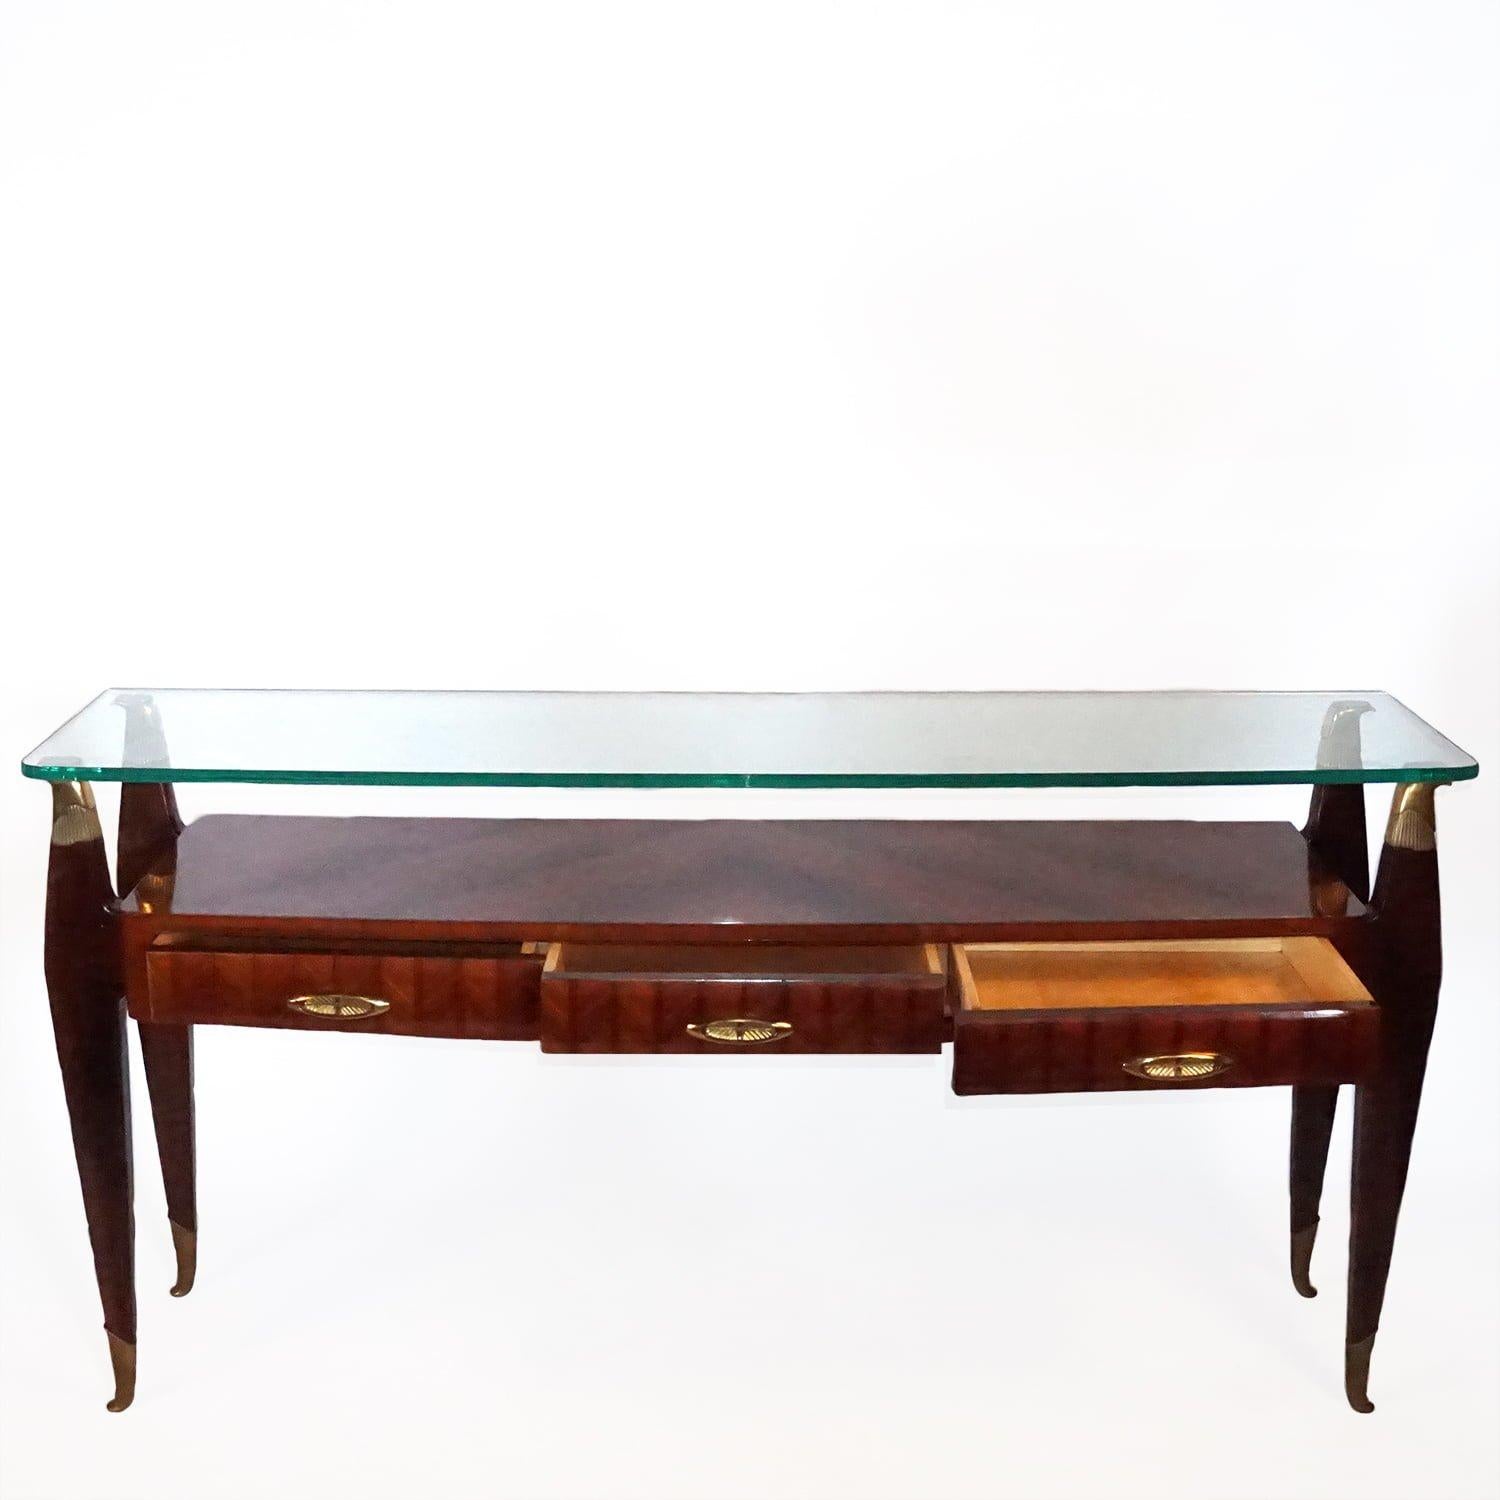 A dark-brown, vintage Mid-Century Modern Italian console table, Atelier di Varedo. Designed most likely by Osvaldo Borsani in good condition. The legs are made of hand crafted ebonized Mahogany and Rosewood with detailed brass décor and three